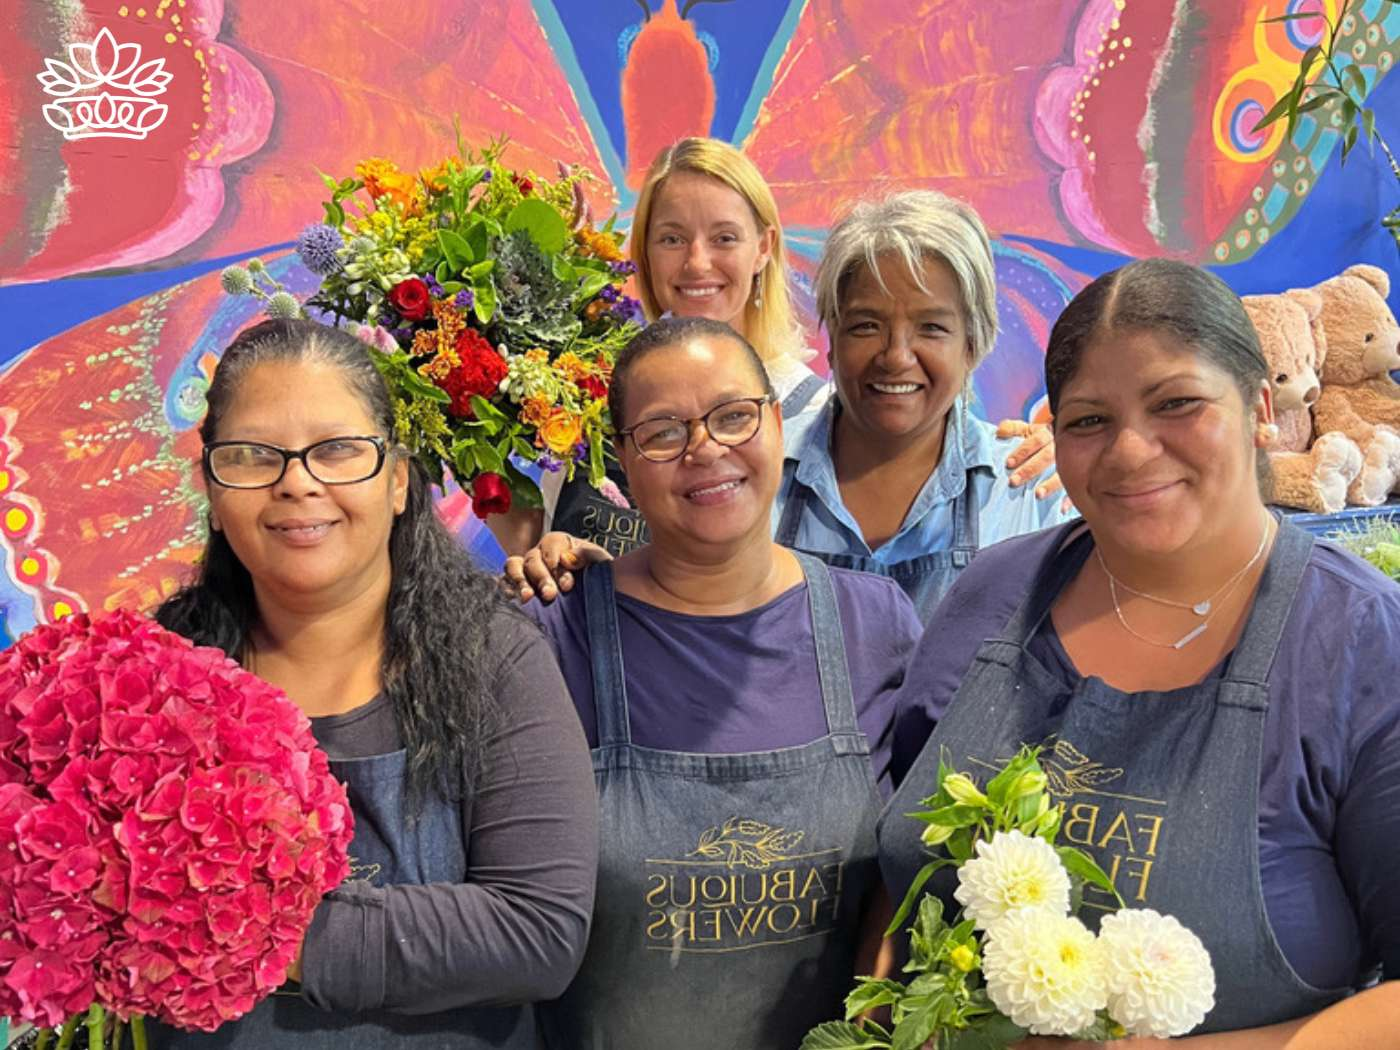 A group of friendly and experienced florists smiling warmly, holding vibrant bouquets, representing the dedicated team behind the scenes at Fabulous Flowers and Gifts.